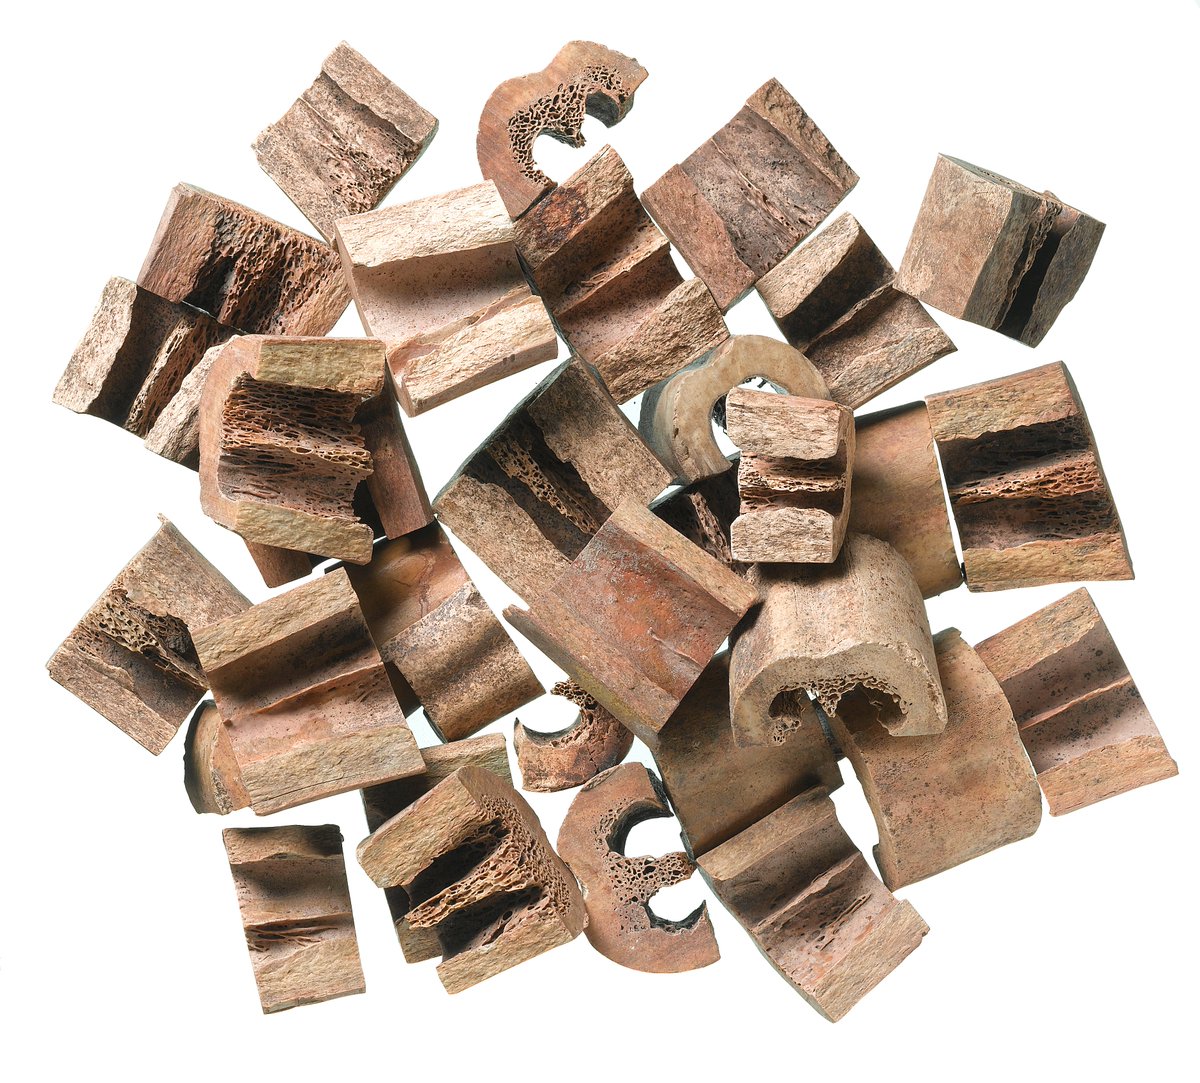 In 17th-18th century  #London craftspeople were working bone & ivory on a huge scale, making incredibly sophisticated things 4000+ fragments of workshop waste from a turner's workshop were fly-tipped in The New Churchyard burial ground. Now in  @MuseumofLondon.  #MuseumsUnlocked 1/3